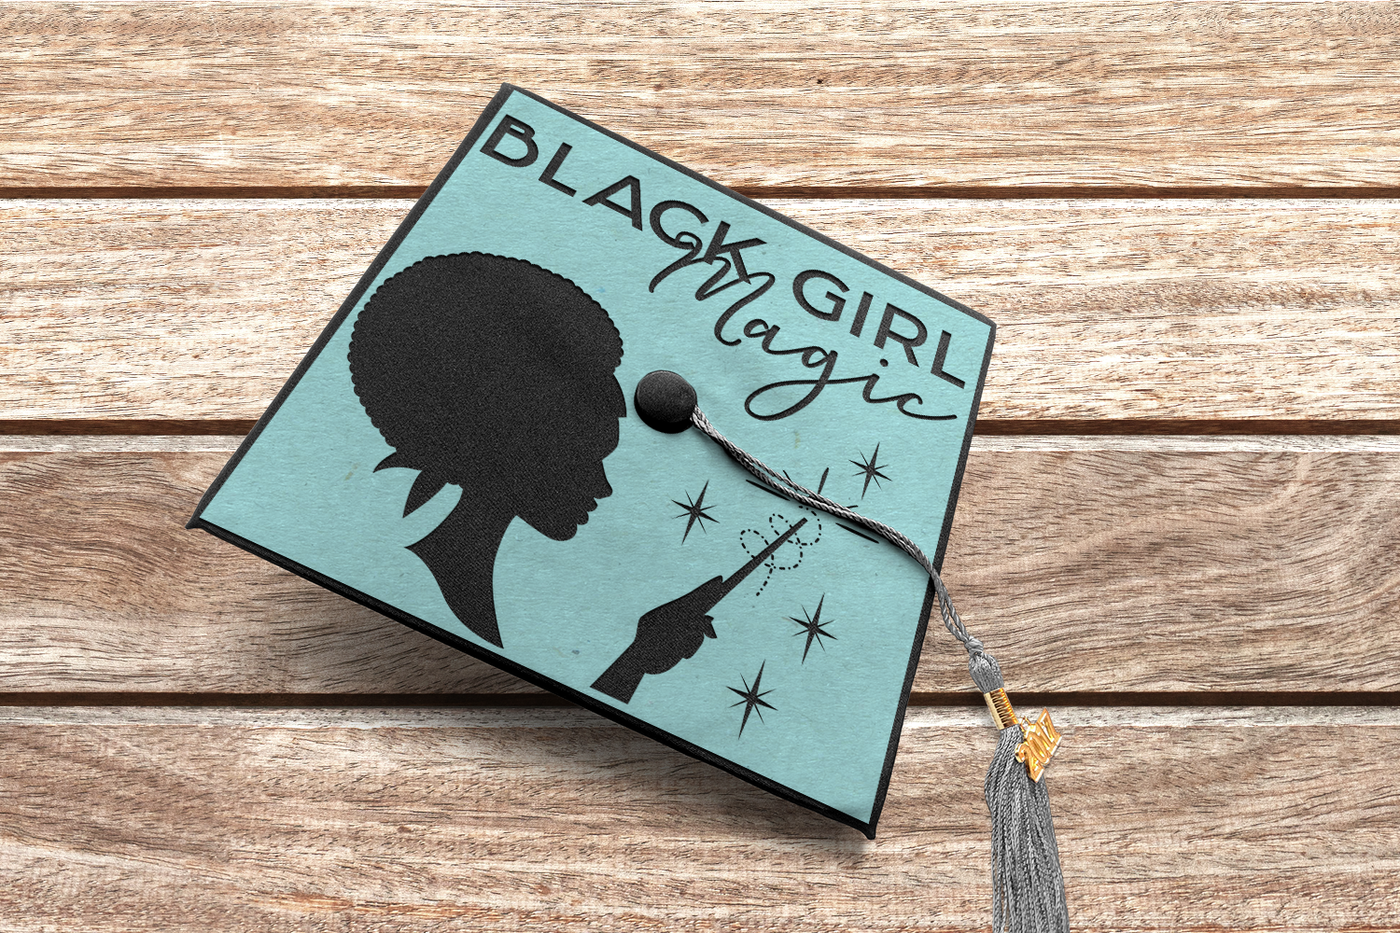 A graduation cap on a wood background. The design on the cap has a cameo style profile of a black woman from the neck up with a scarf and an afro and the words "Black Girl Magic." She also holds a wand and there are stars and a swirl around the wand.